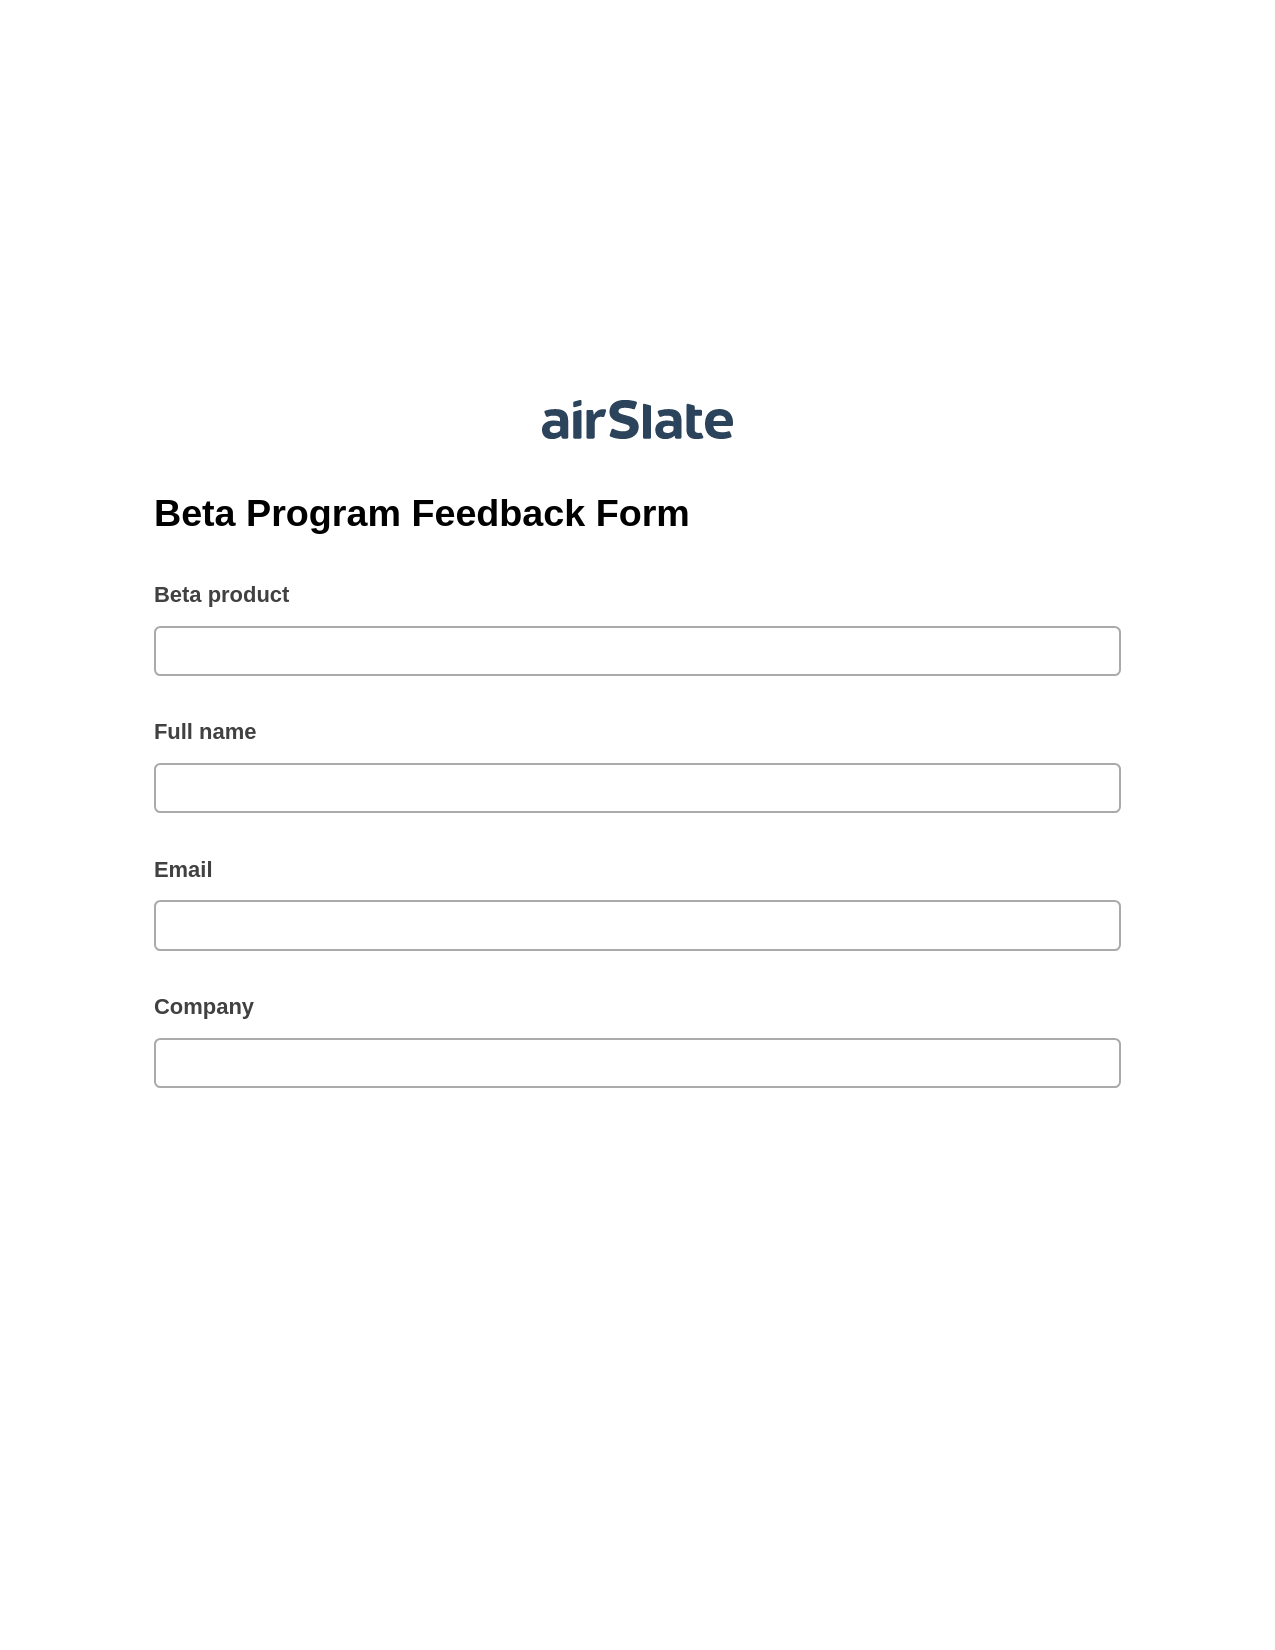 Beta Program Feedback Form Pre-fill Dropdown from Airtable, Send a Slate with Roles Bot, Export to Excel 365 Bot